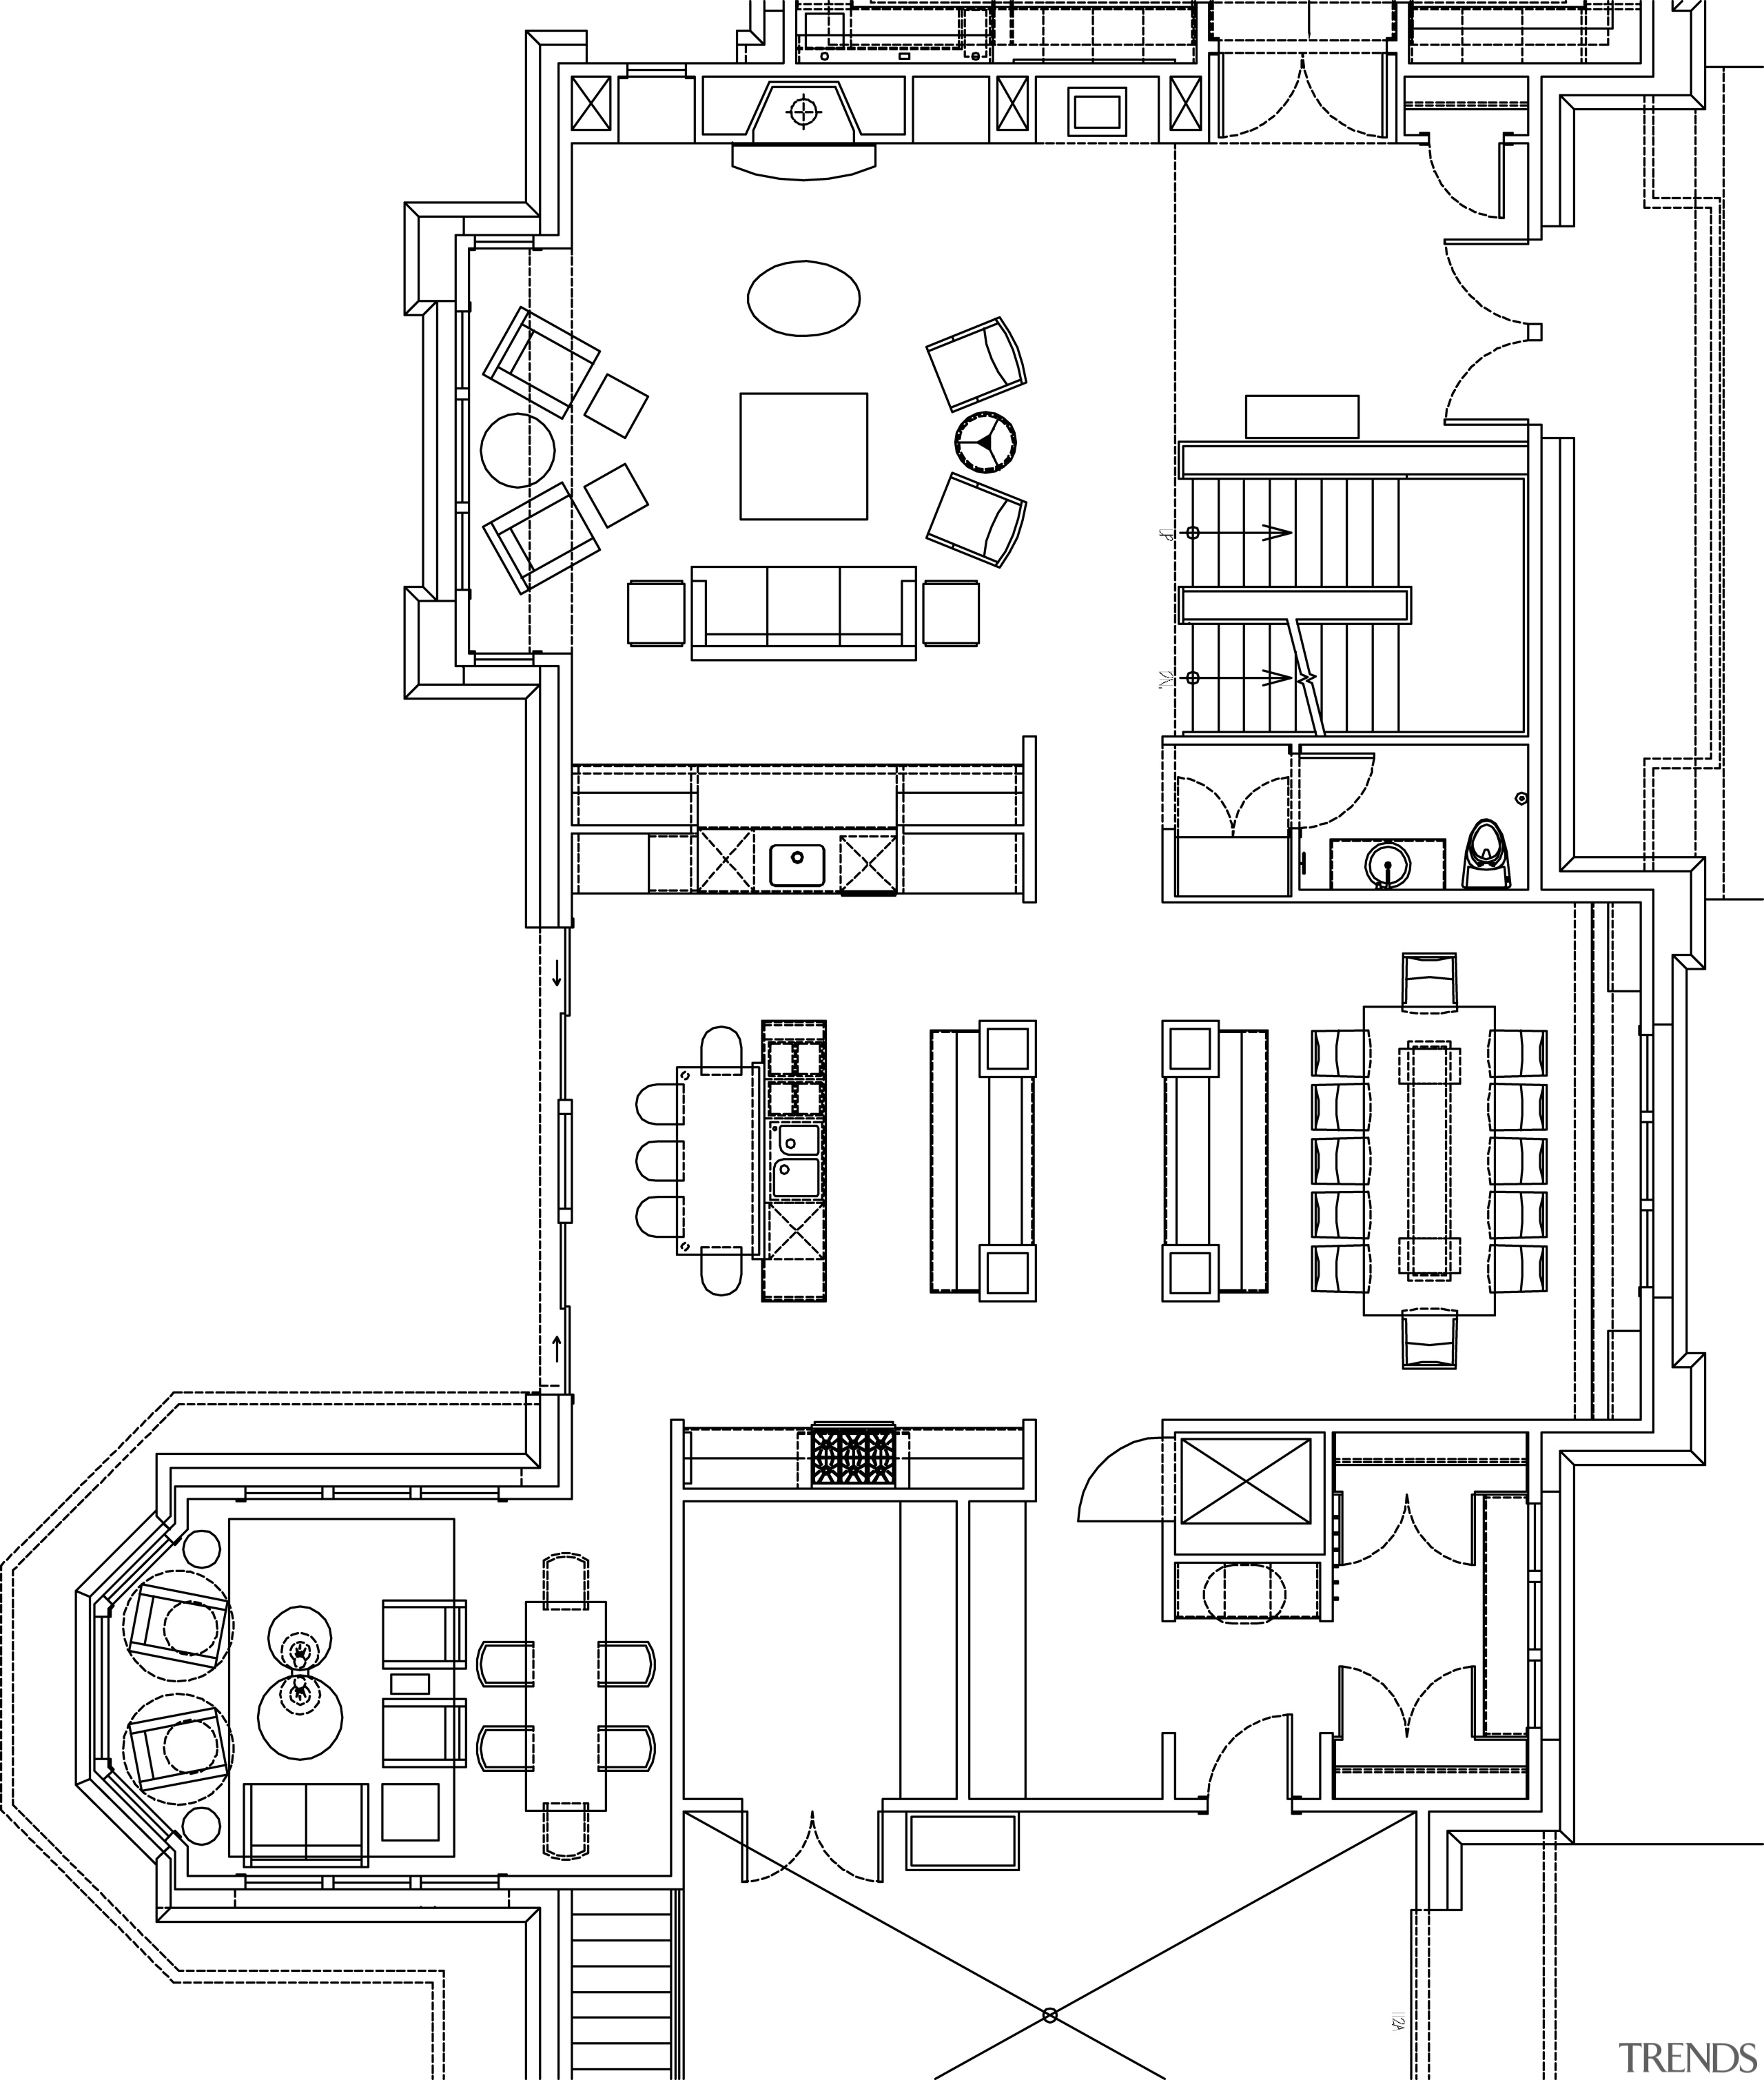 This plan of a kitchen designed by by architecture, area, black and white, design, diagram, drawing, floor plan, line, line art, plan, product, product design, structure, technical drawing, white